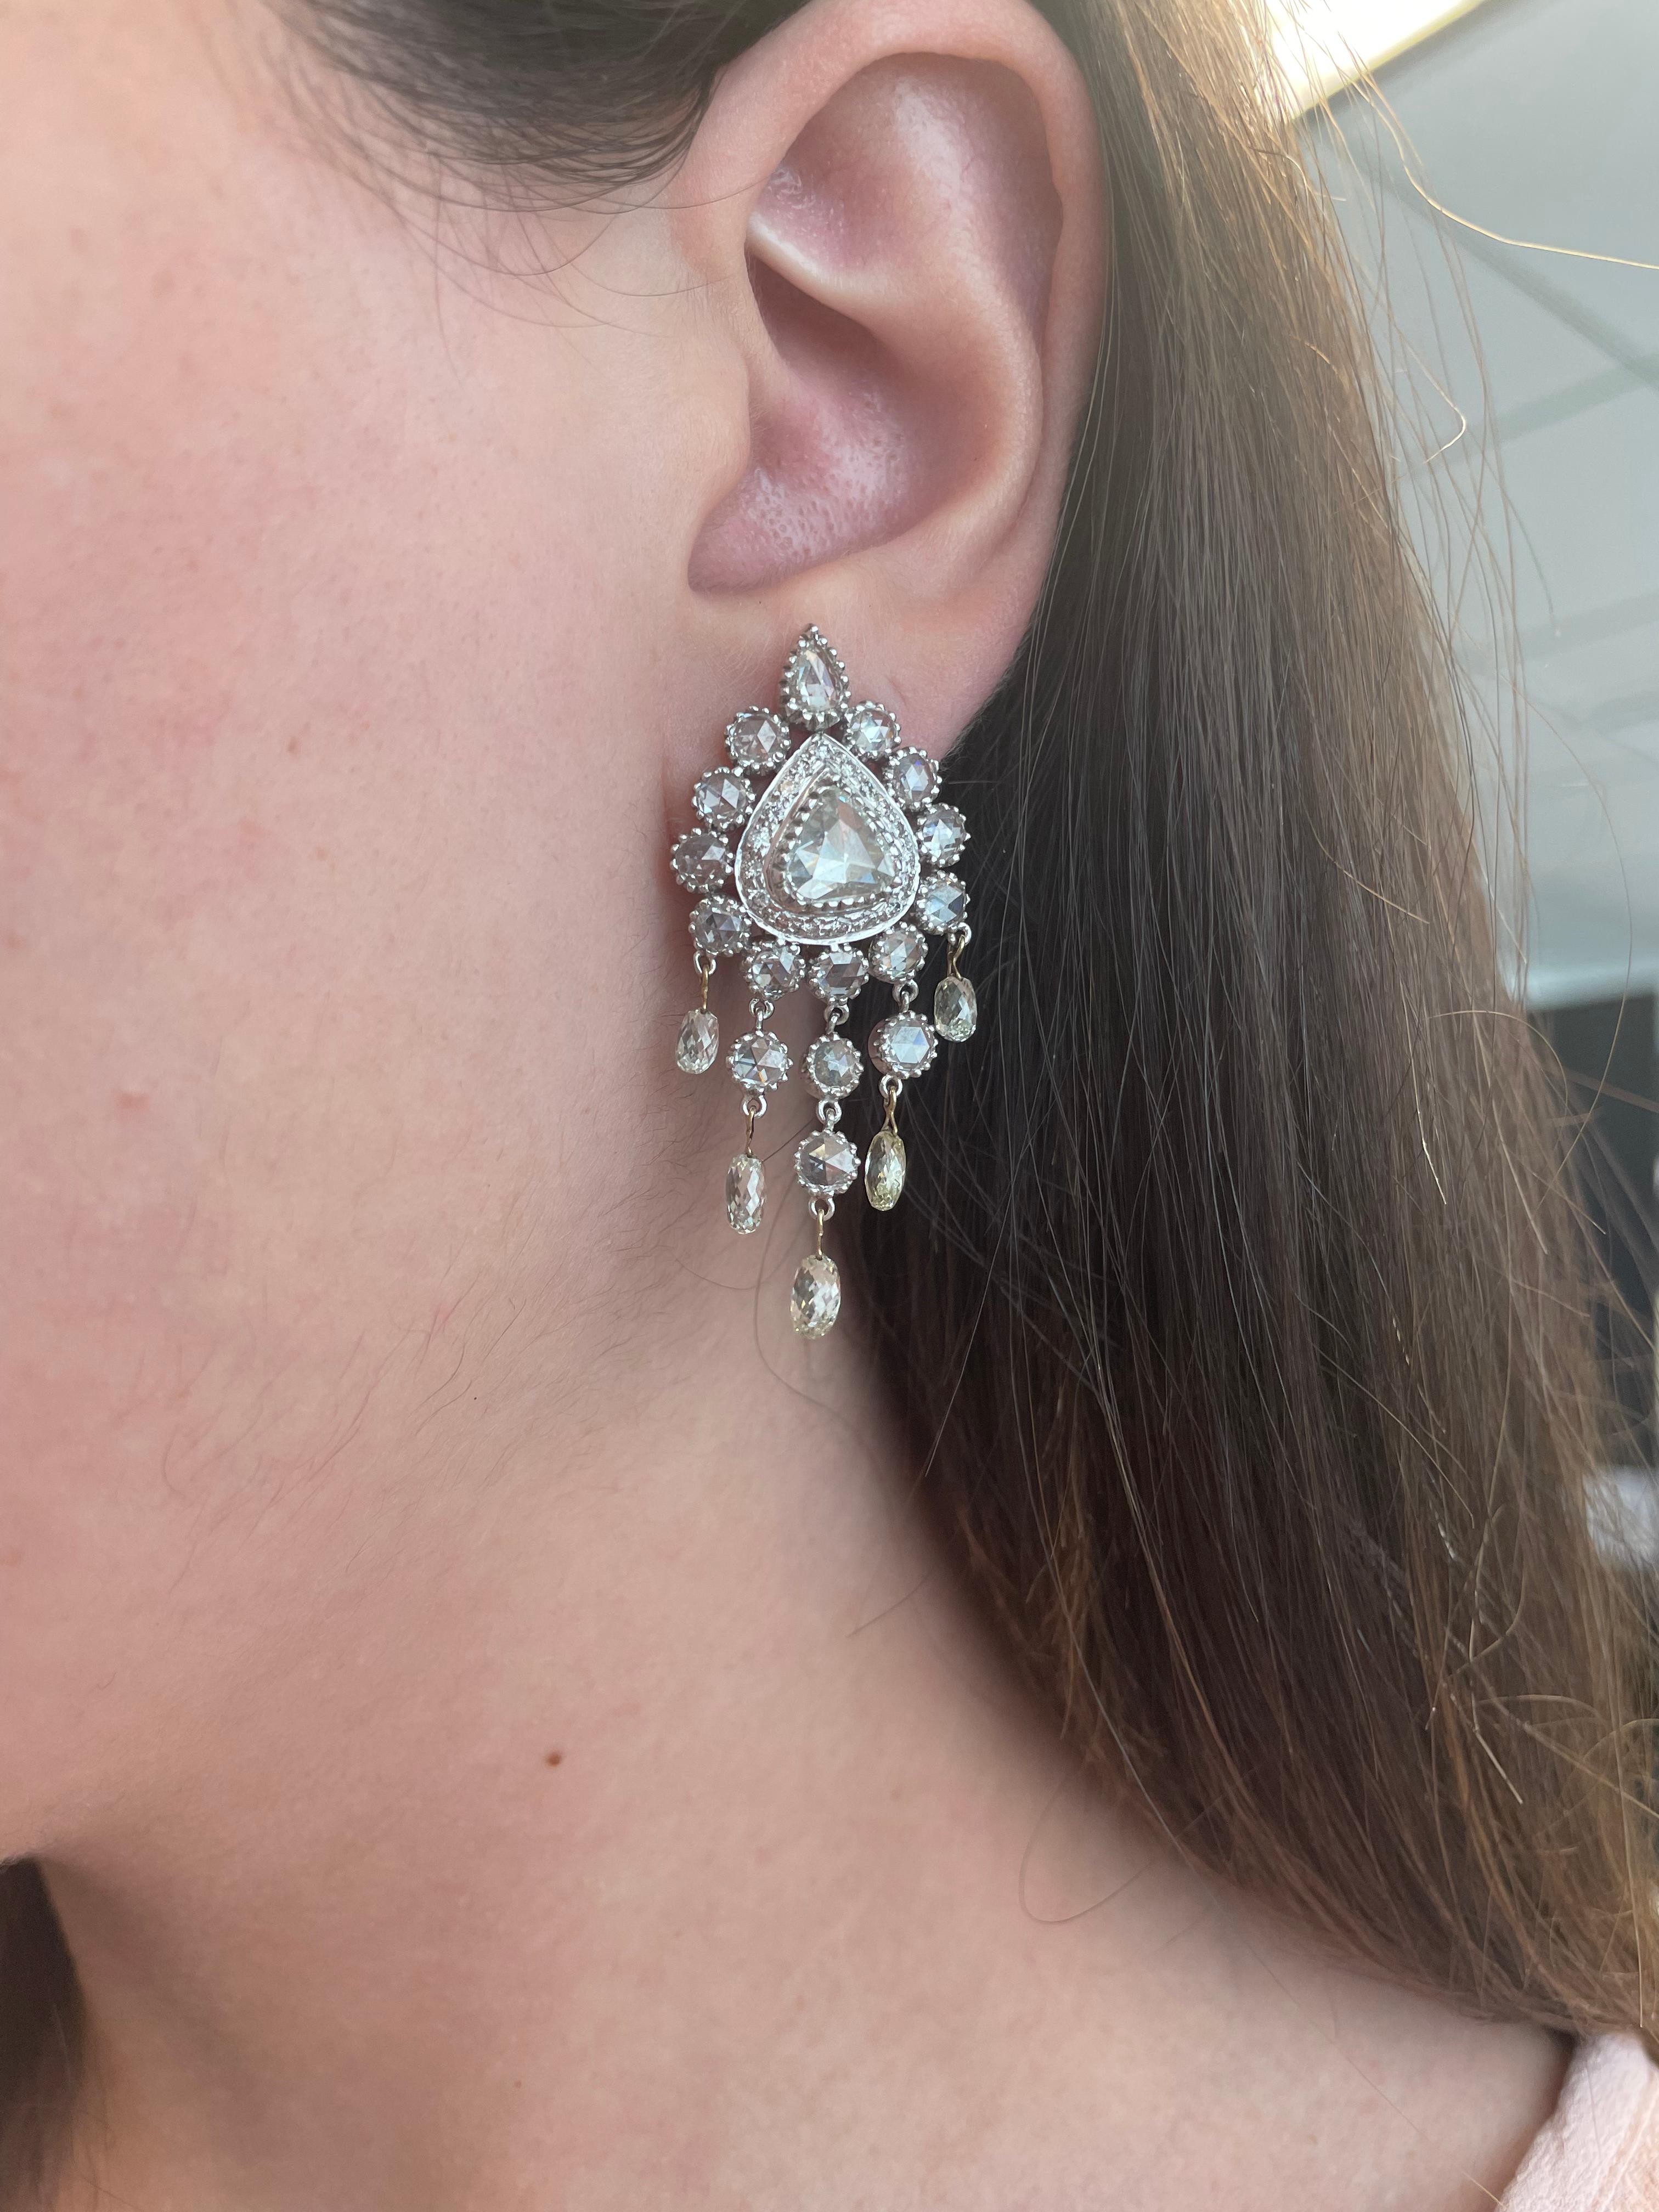 Stunning rose cut diamond chandelier statement earrings.
11.35 carats of rose cut, briolette and round diamonds. Rose cuts and rounds approximately H/I color and VS clarity. Briolette cut diamonds approximately J/K color and VS clarity. 18-karat